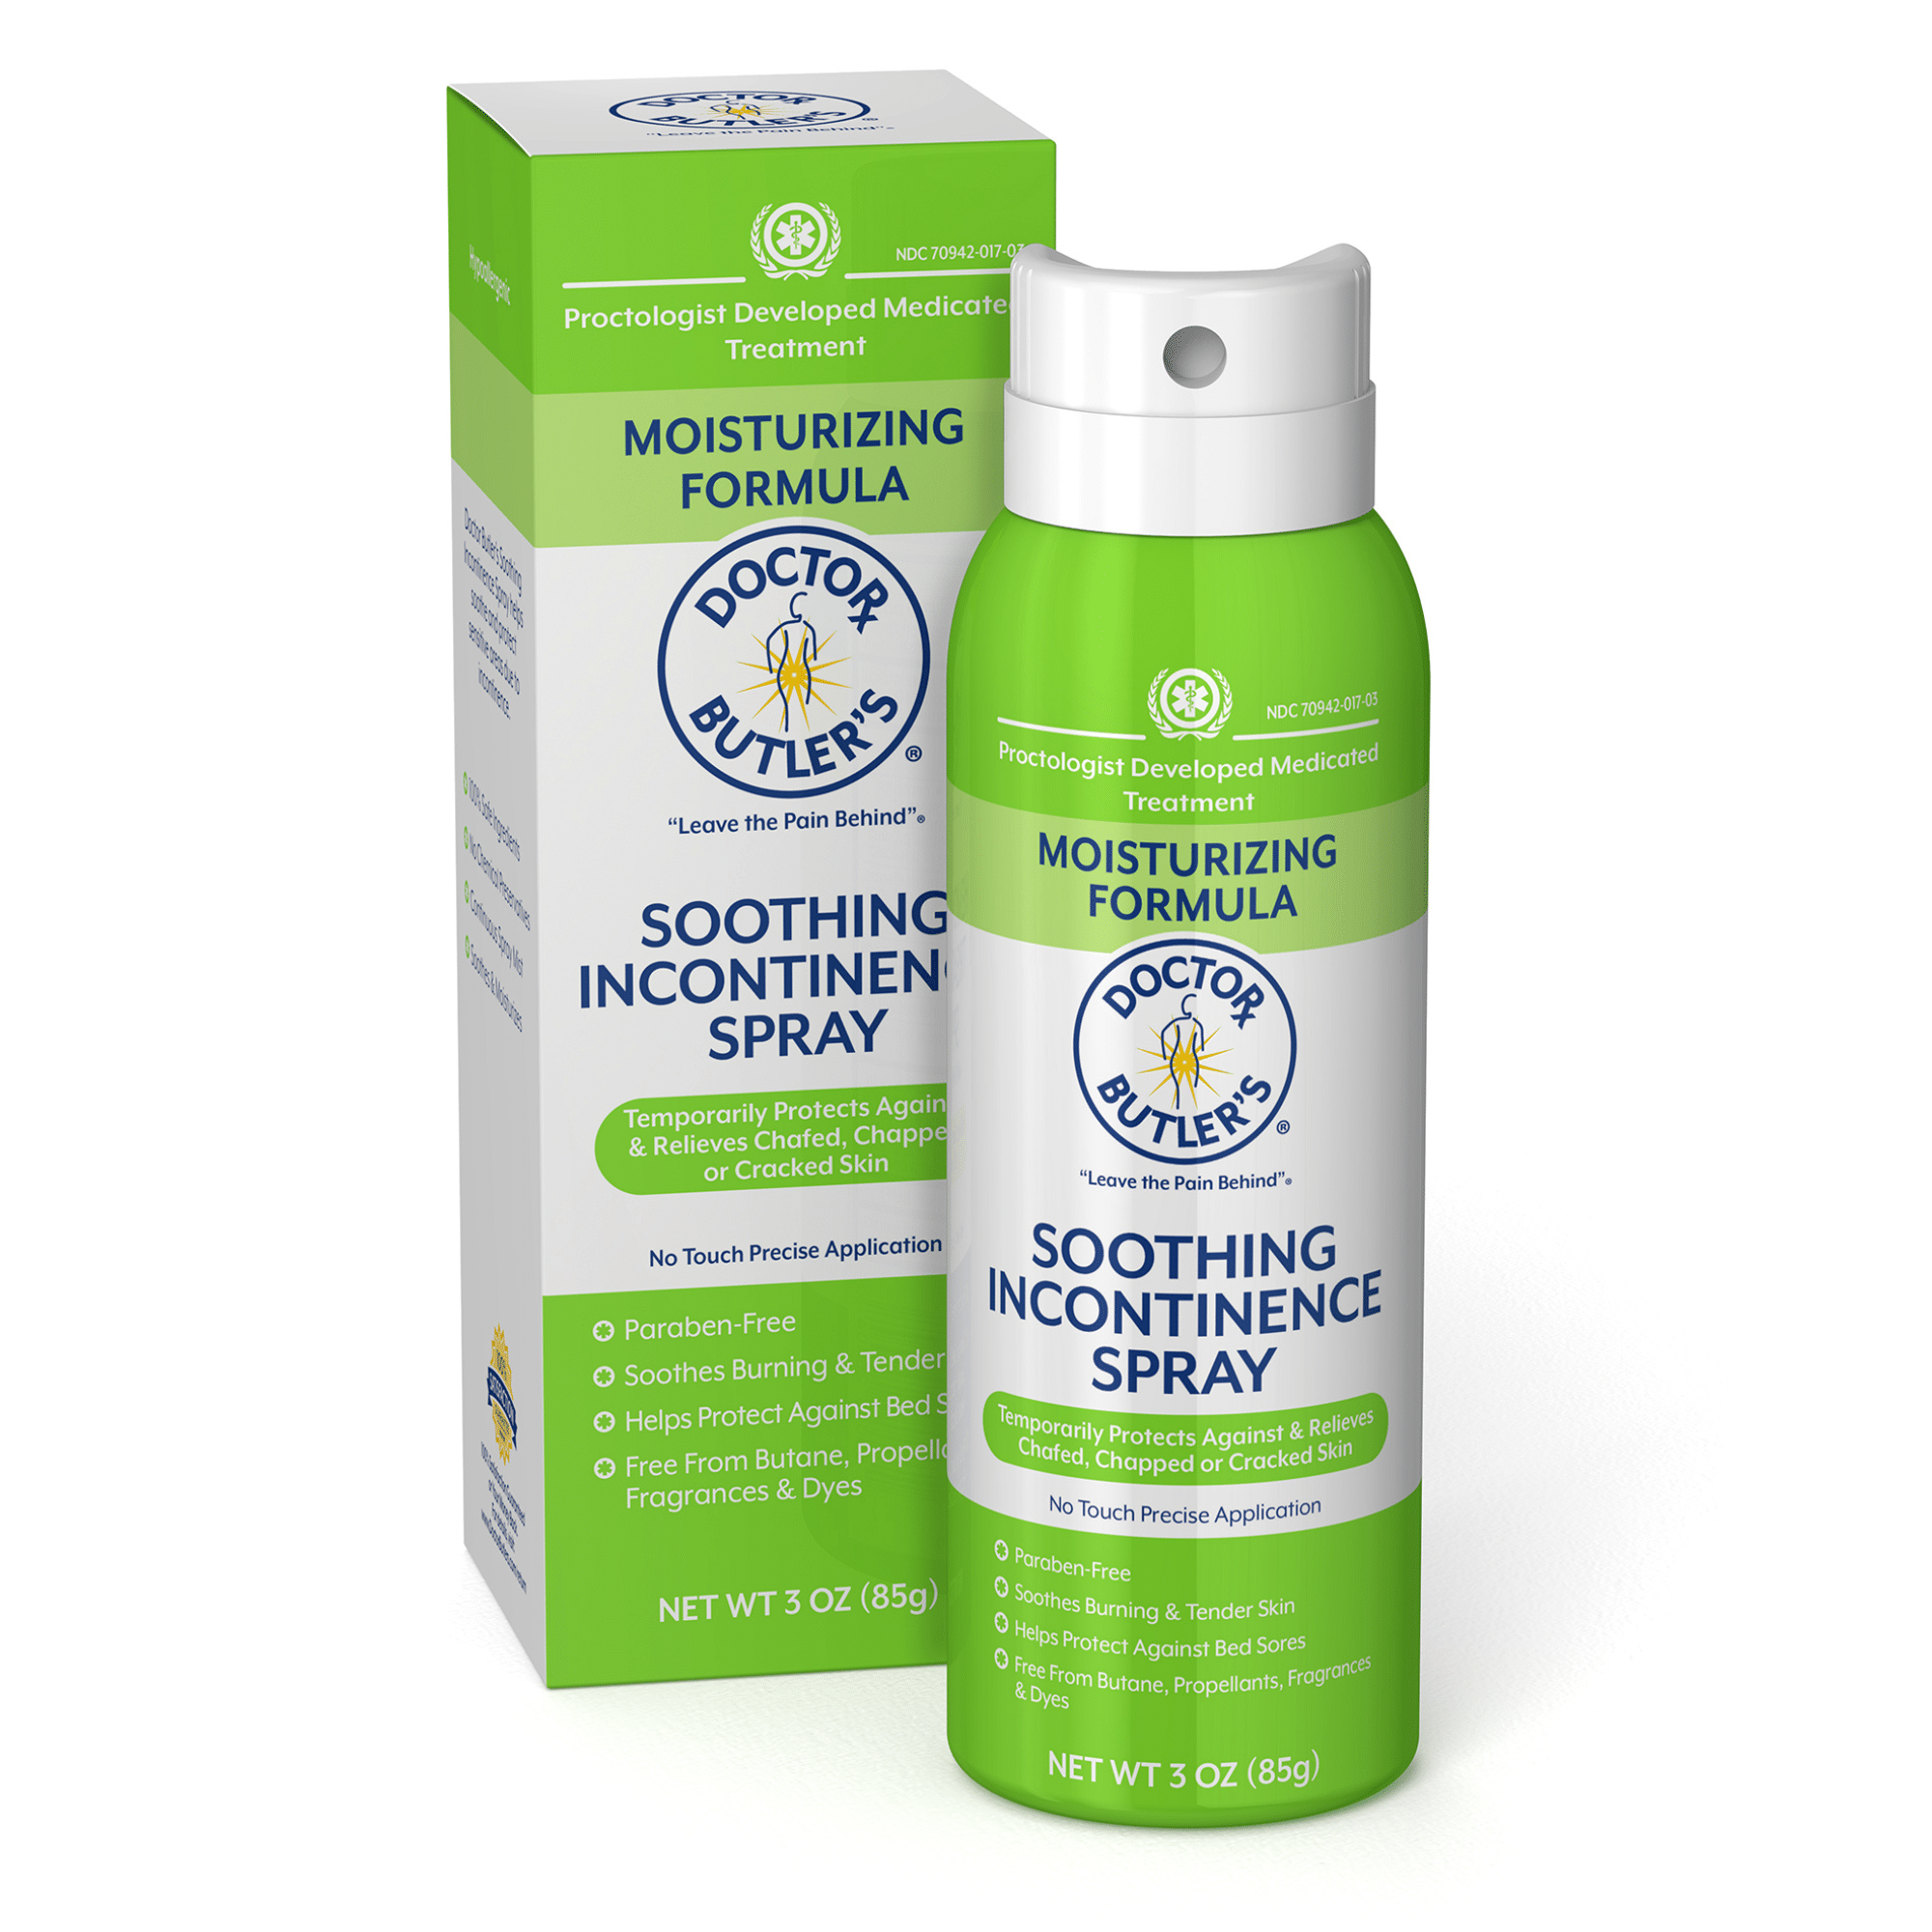 Soothing Incontinence Spray by Doctor Butler's